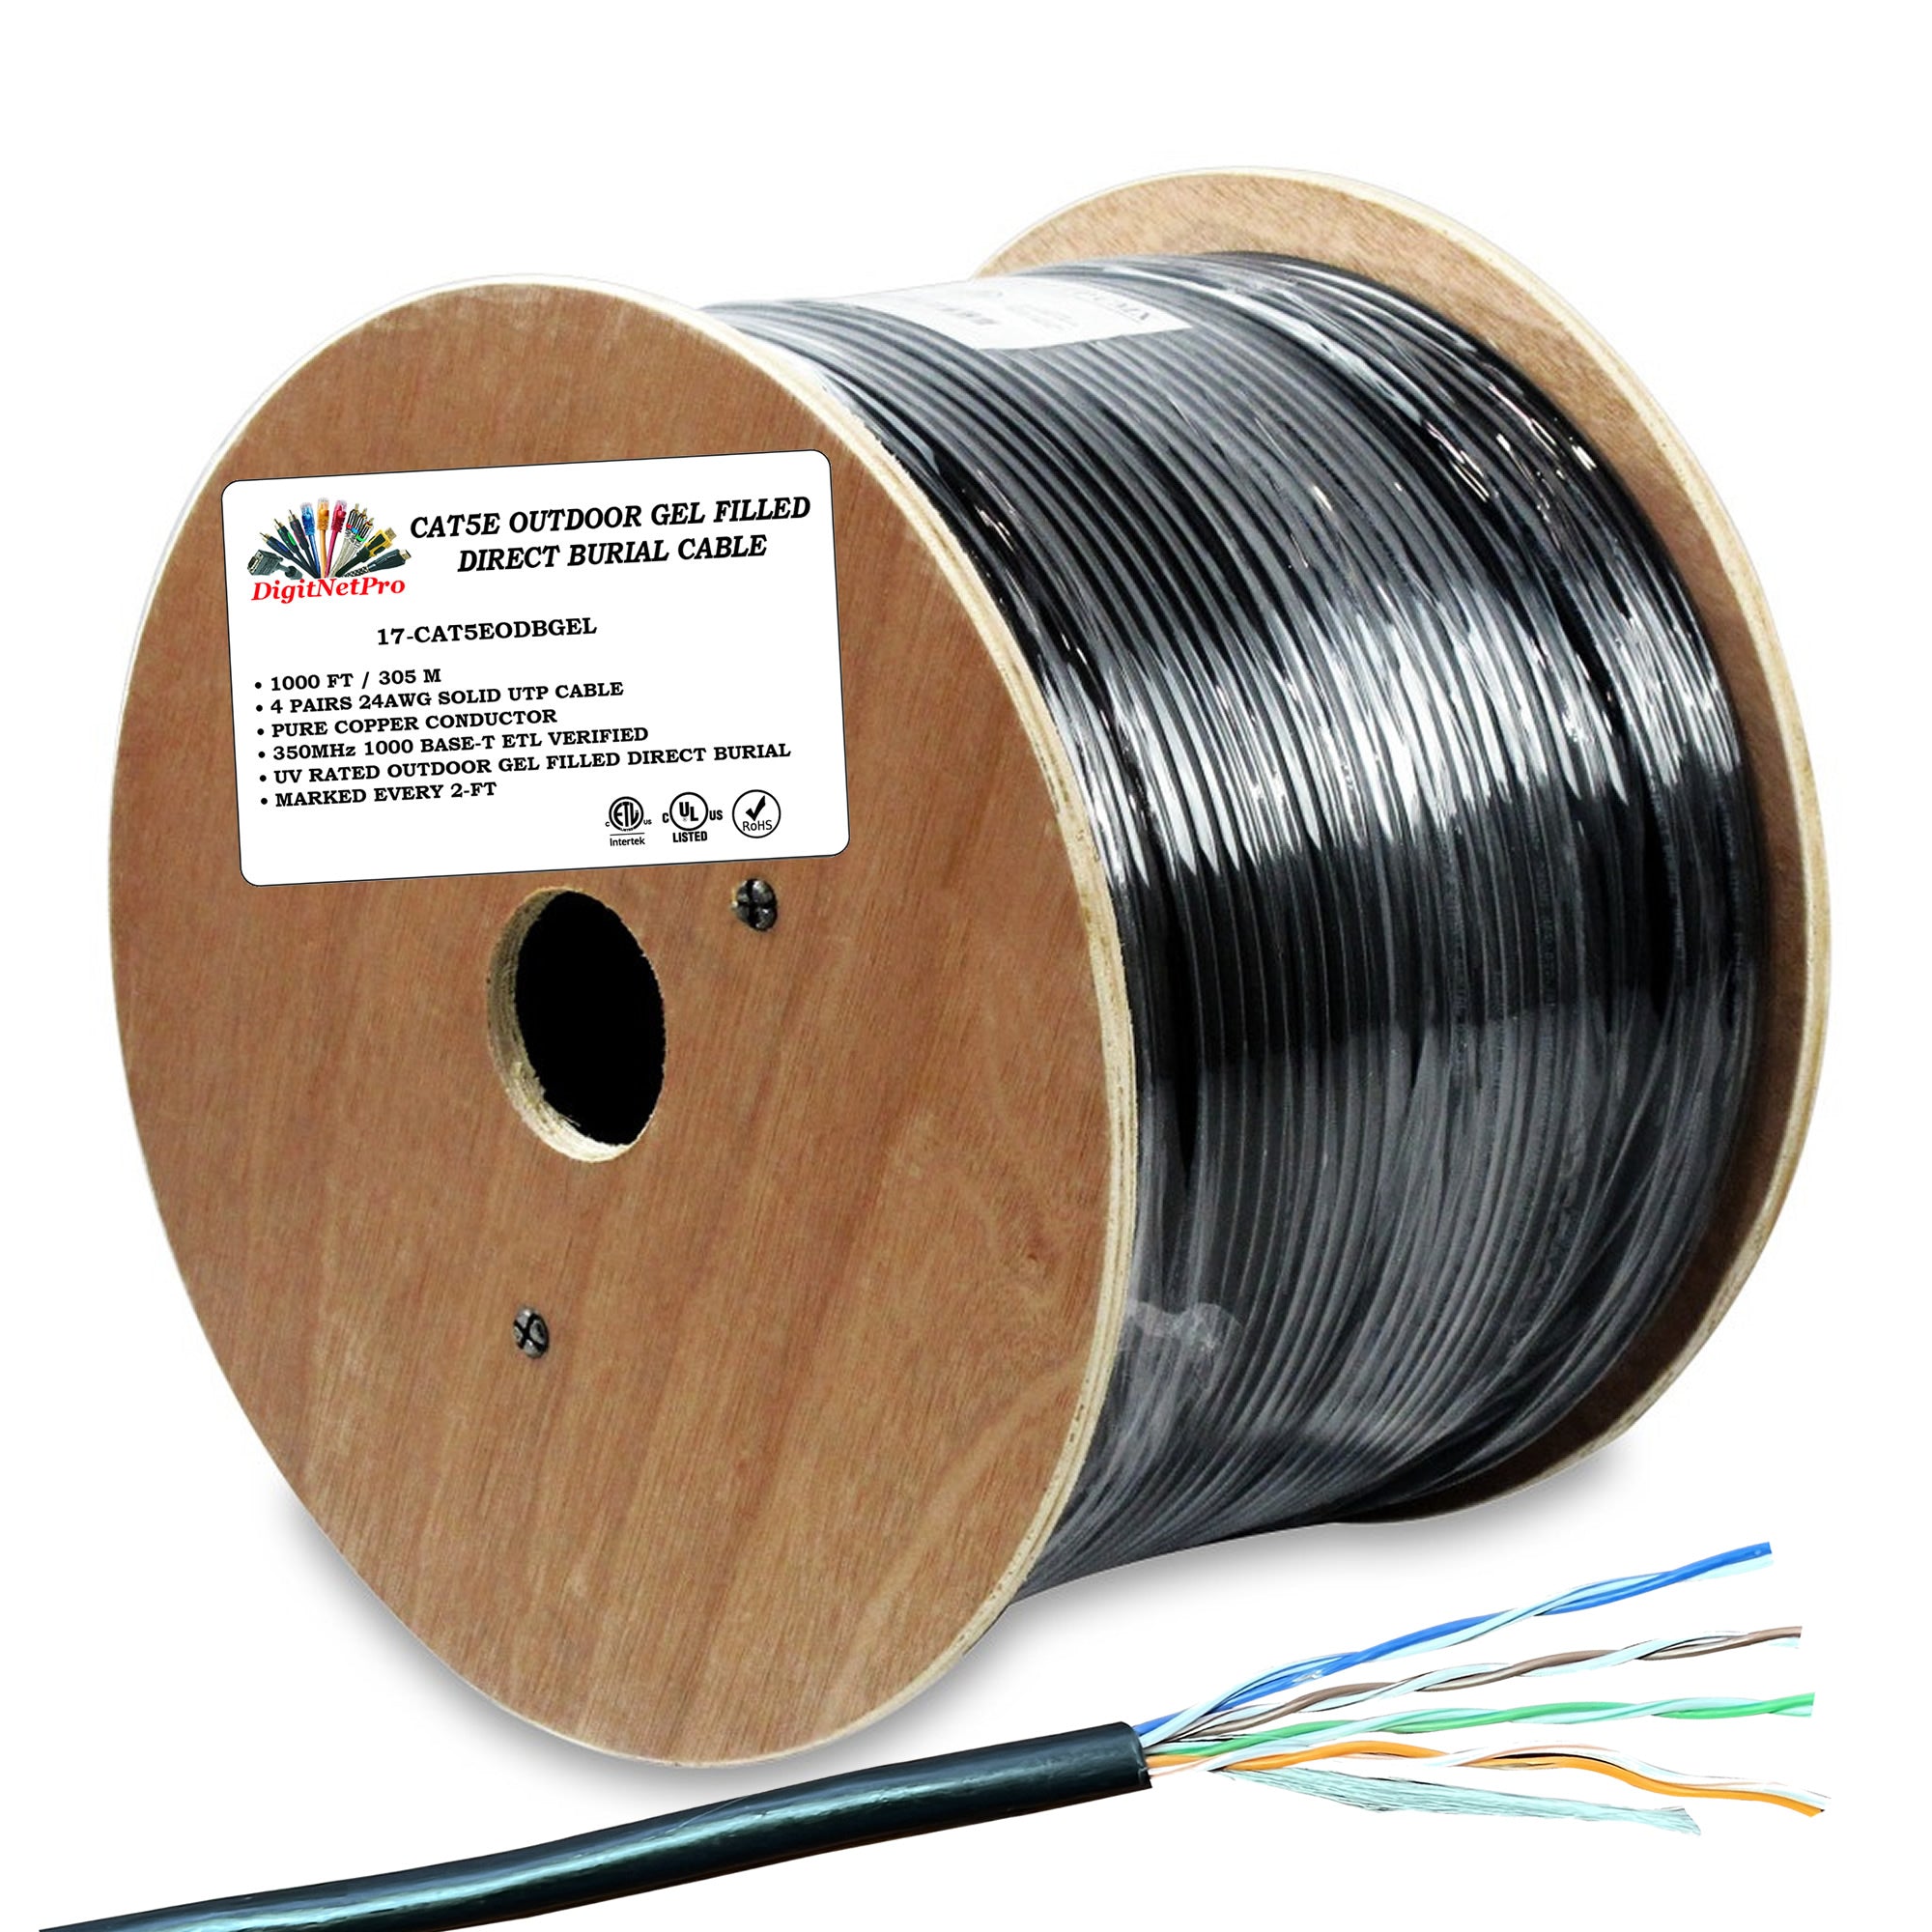 17-CAT5EODBGEL CAT5E Outdoor Gel Filled Direct Burial Cable - 1000FT